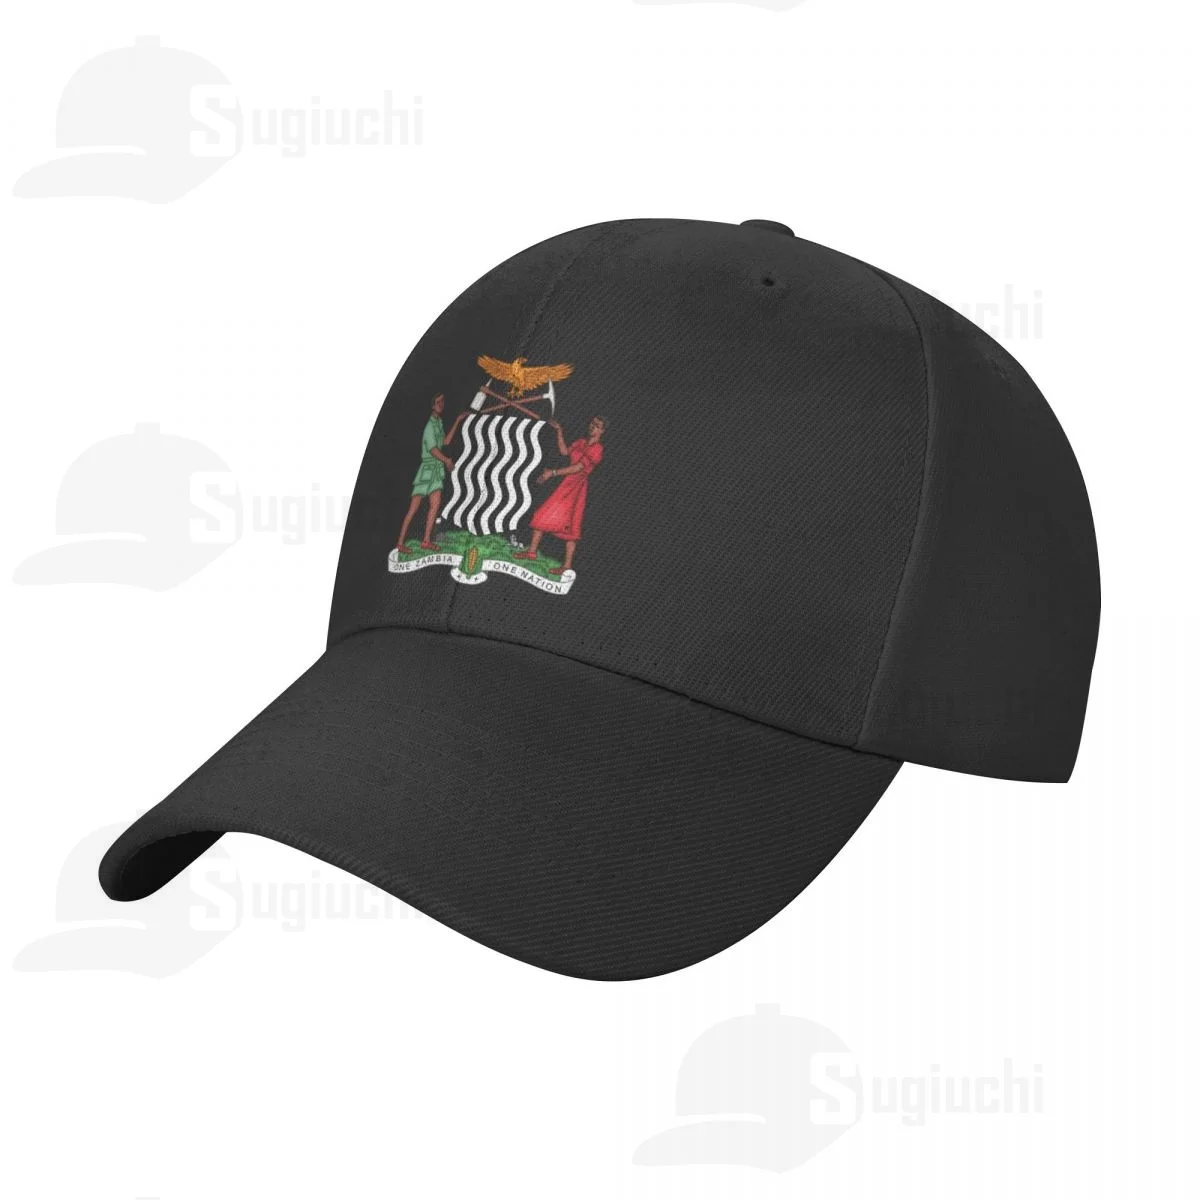 

National Emblem Of Zambia Coat Of Arms Sun Baseball Cap Dad Hats Adjustable For Men Women Unisex Cool Outdoor Hat